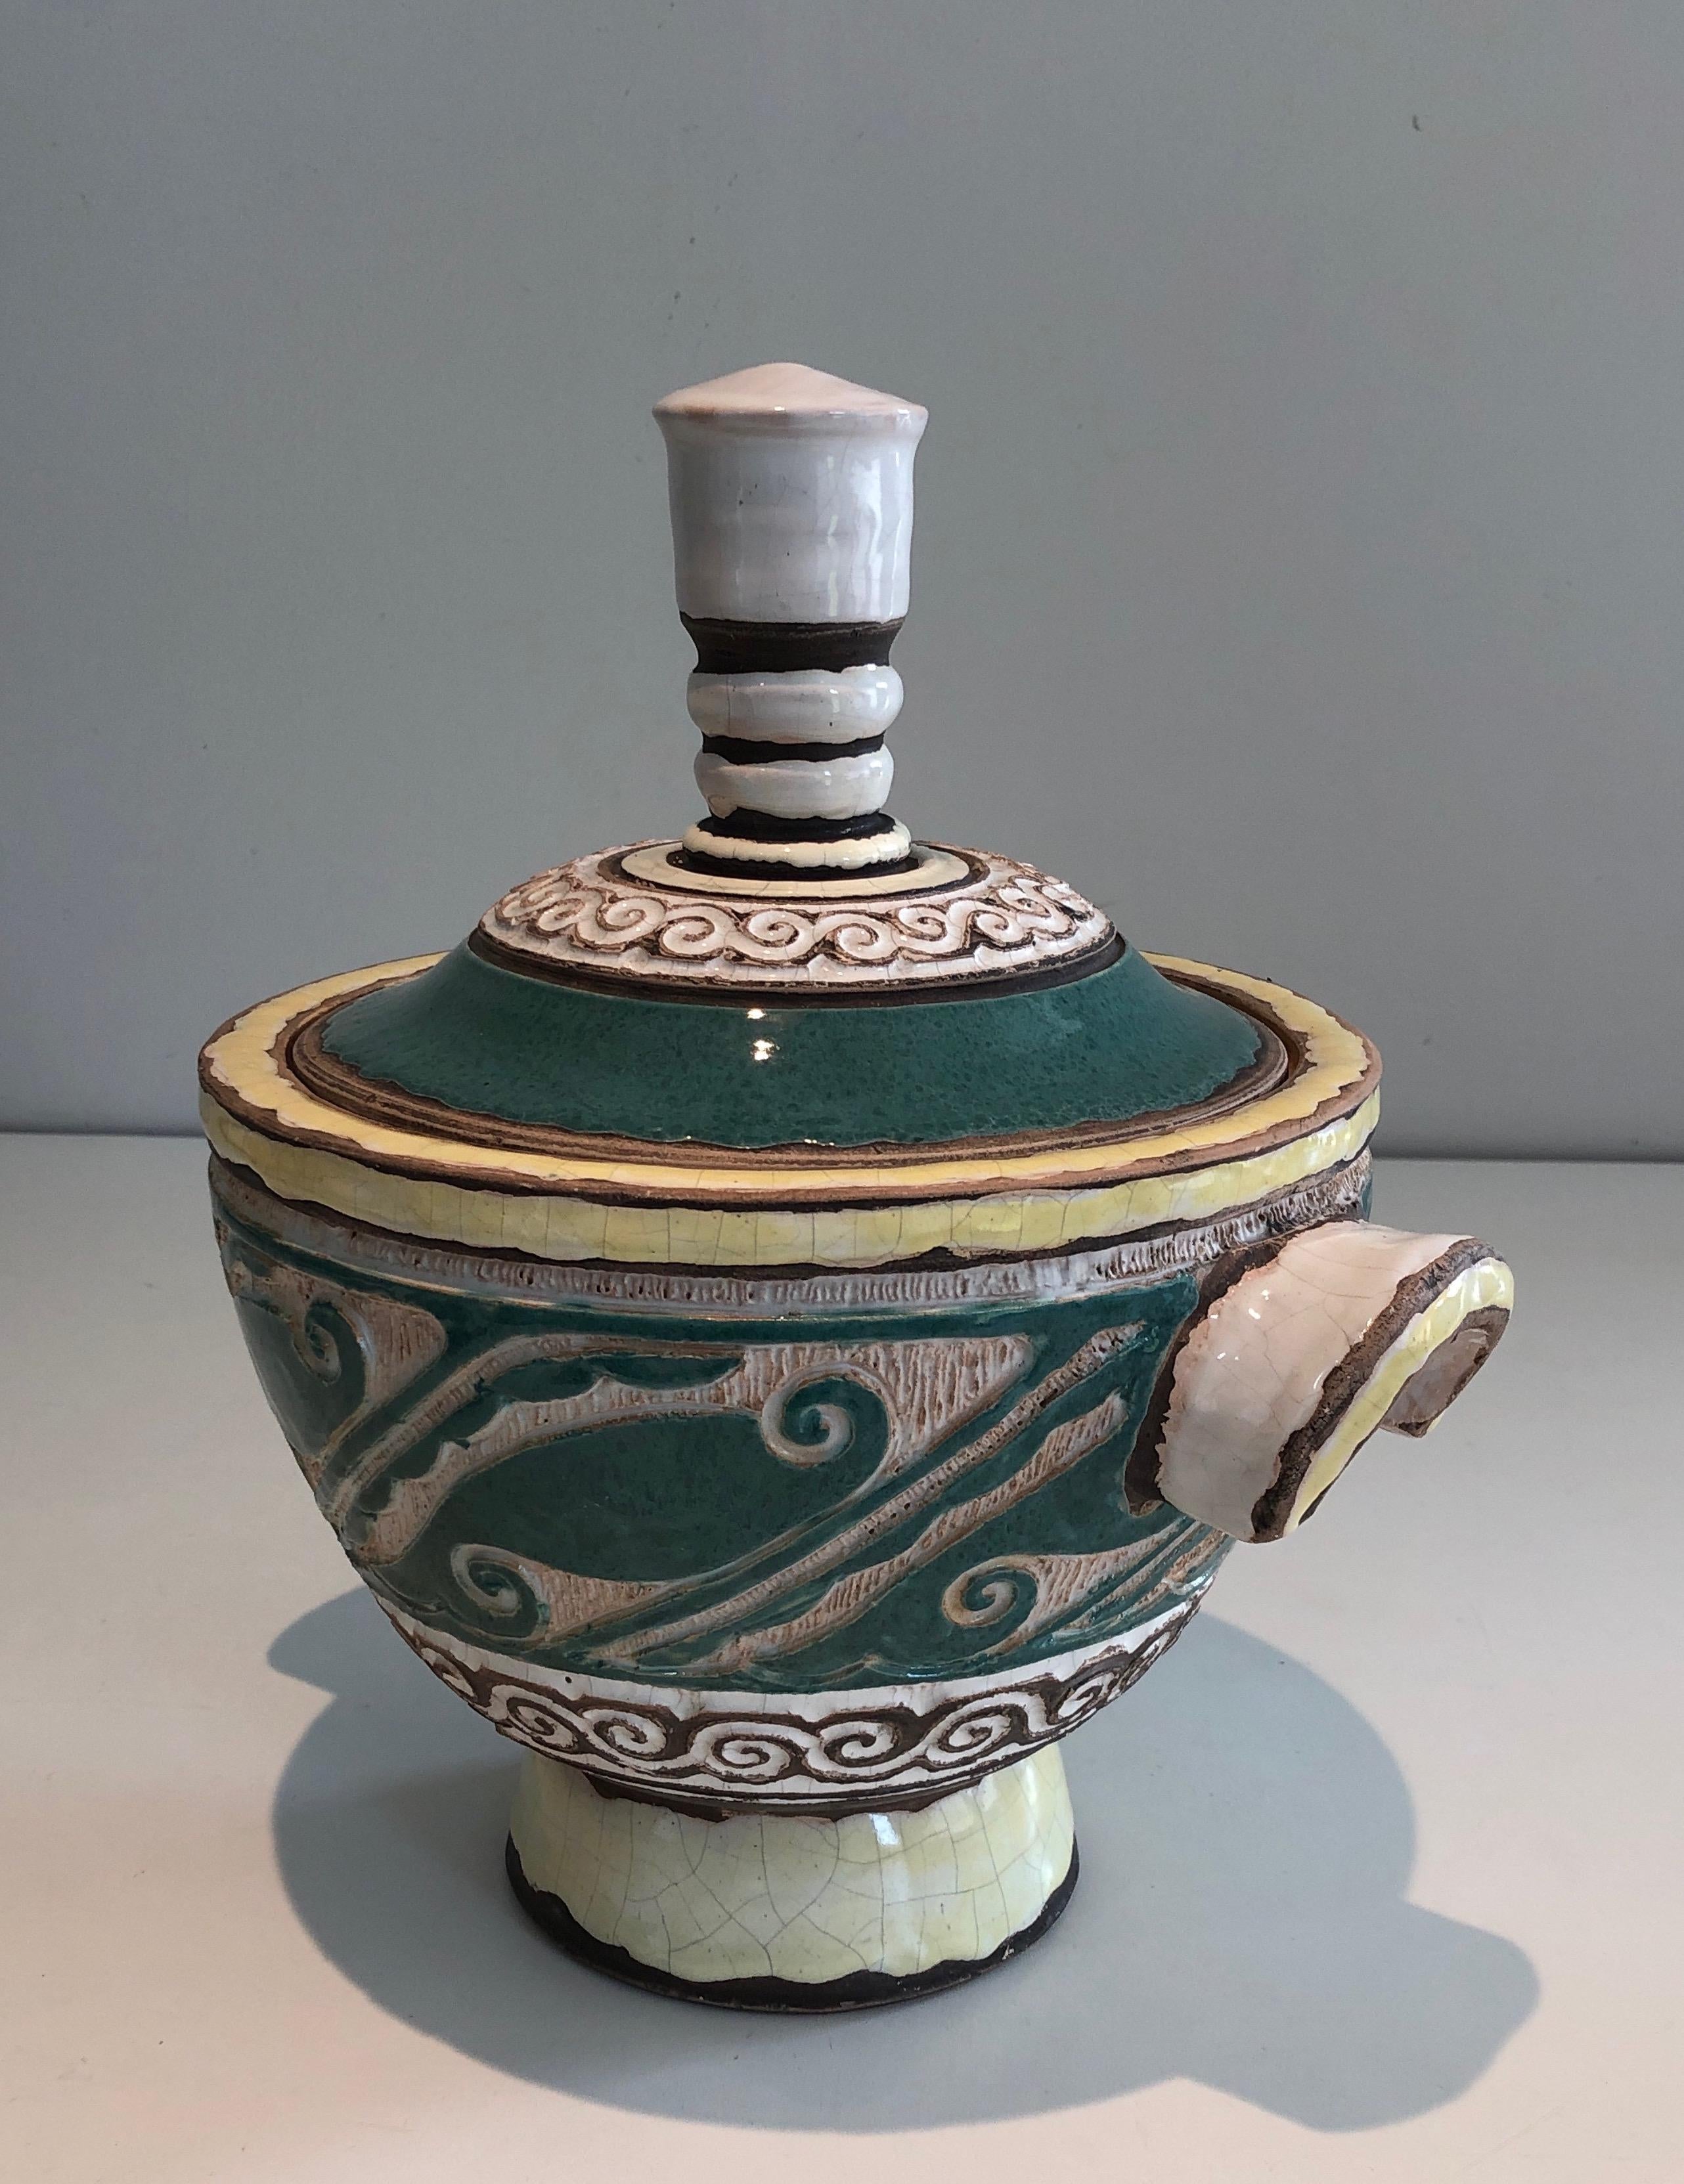 This nice and unusual cover pot is made of ceramic. This is a French work by signed Paul Dordet (1896-1996). Circa 1970